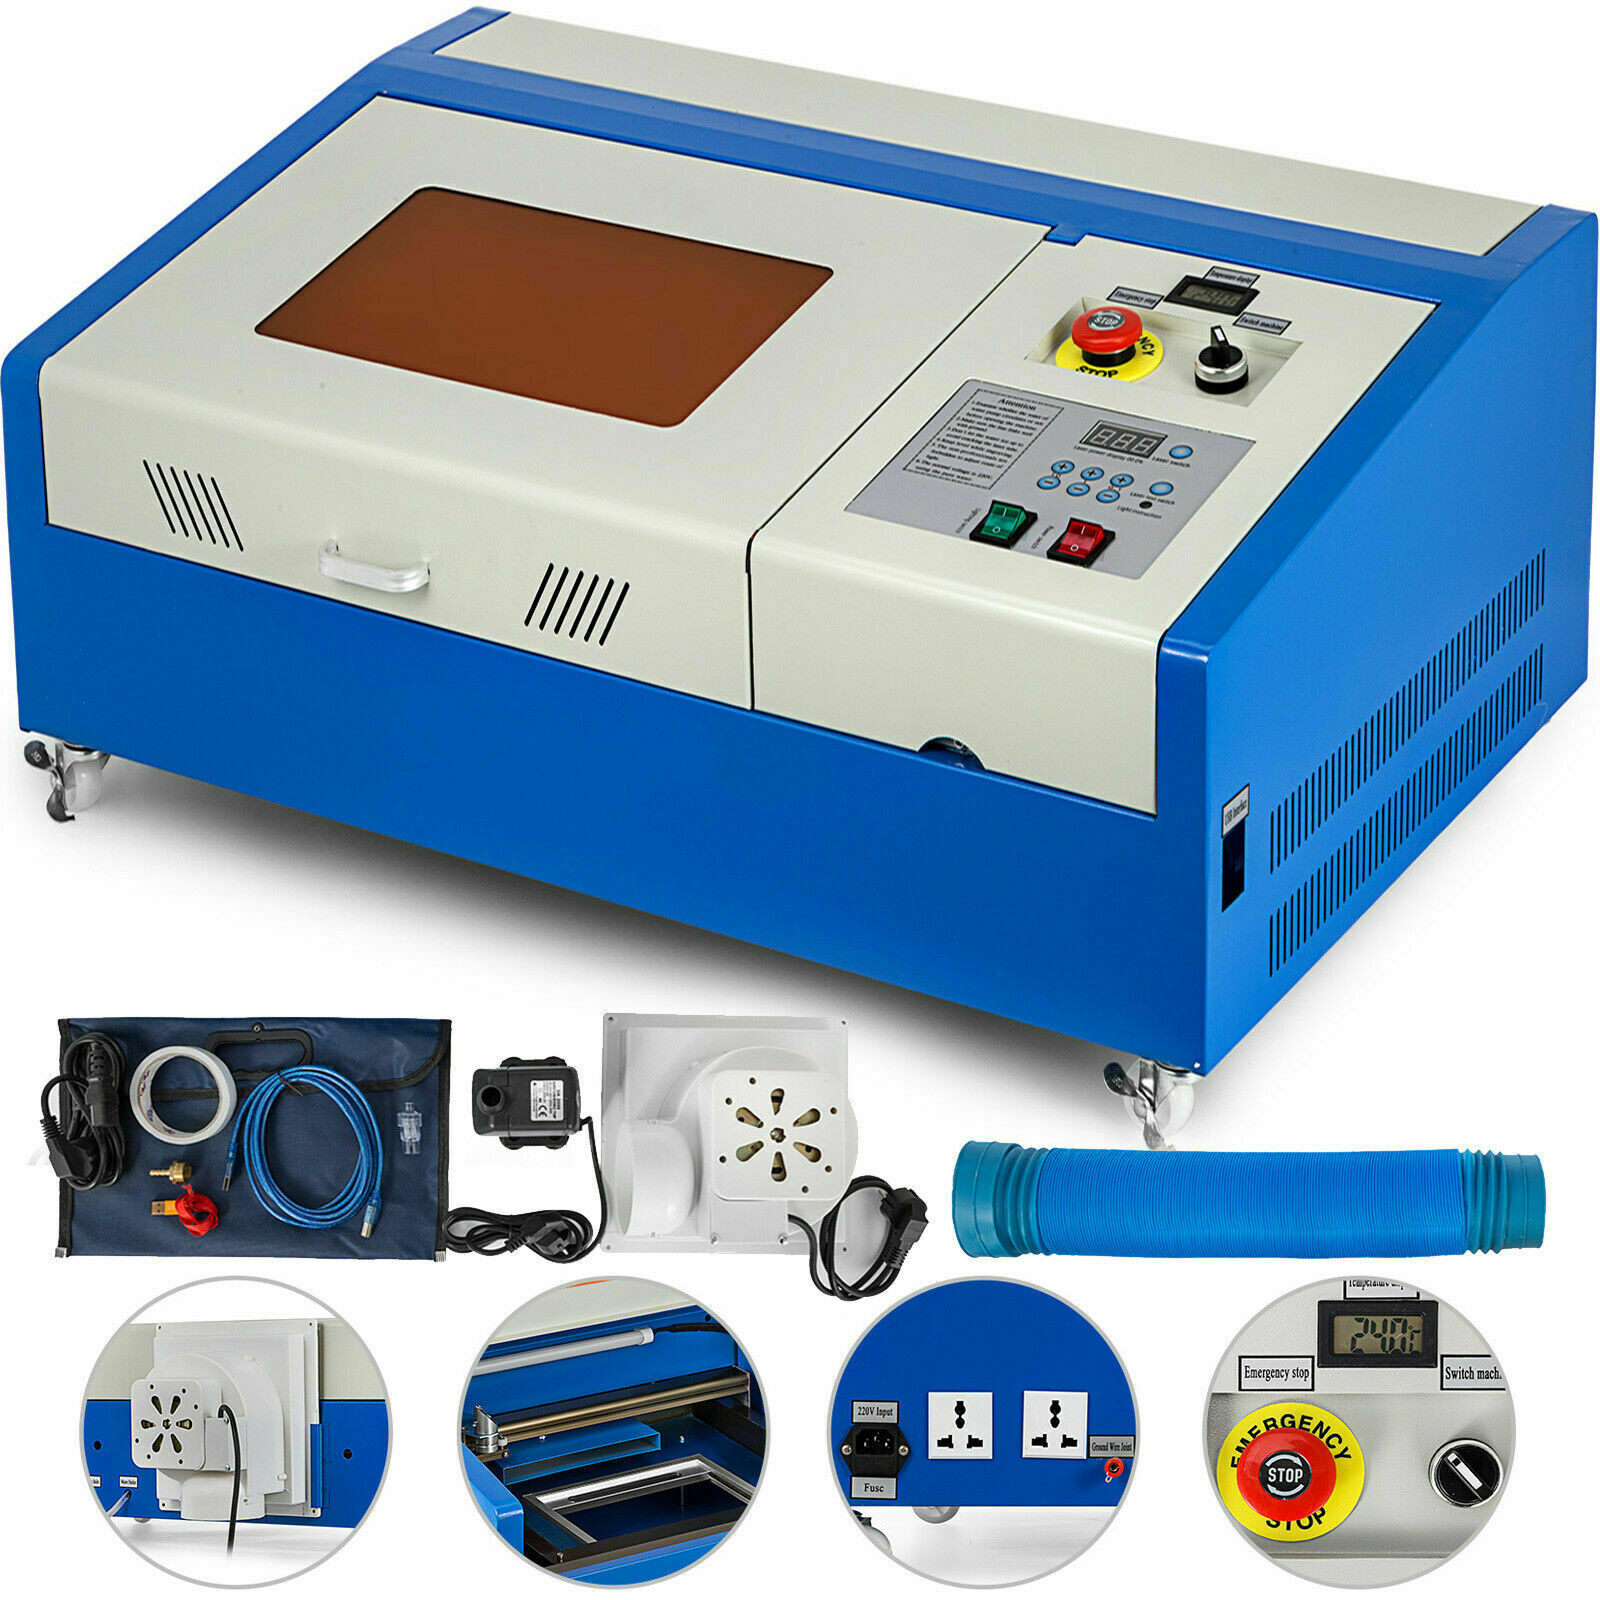 Upgraded 40W USB CO2 Laser Engraver Engraving Cutting Machine Cutter